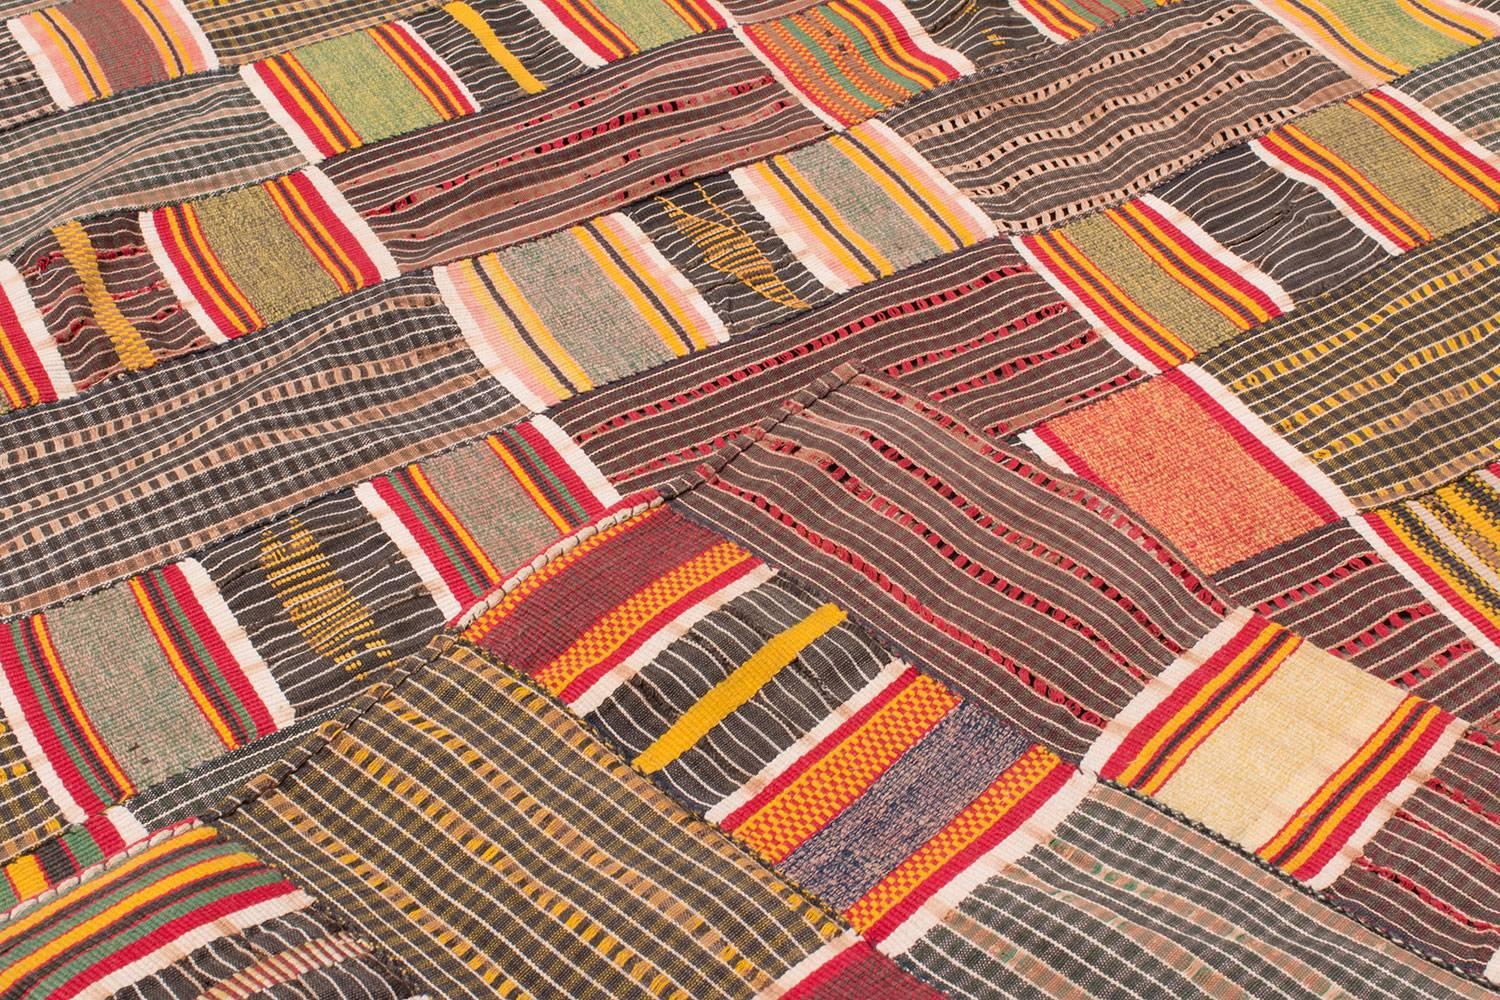 Hand-Woven Antique Ewe Man’s Wrap from Ghana, West Africa